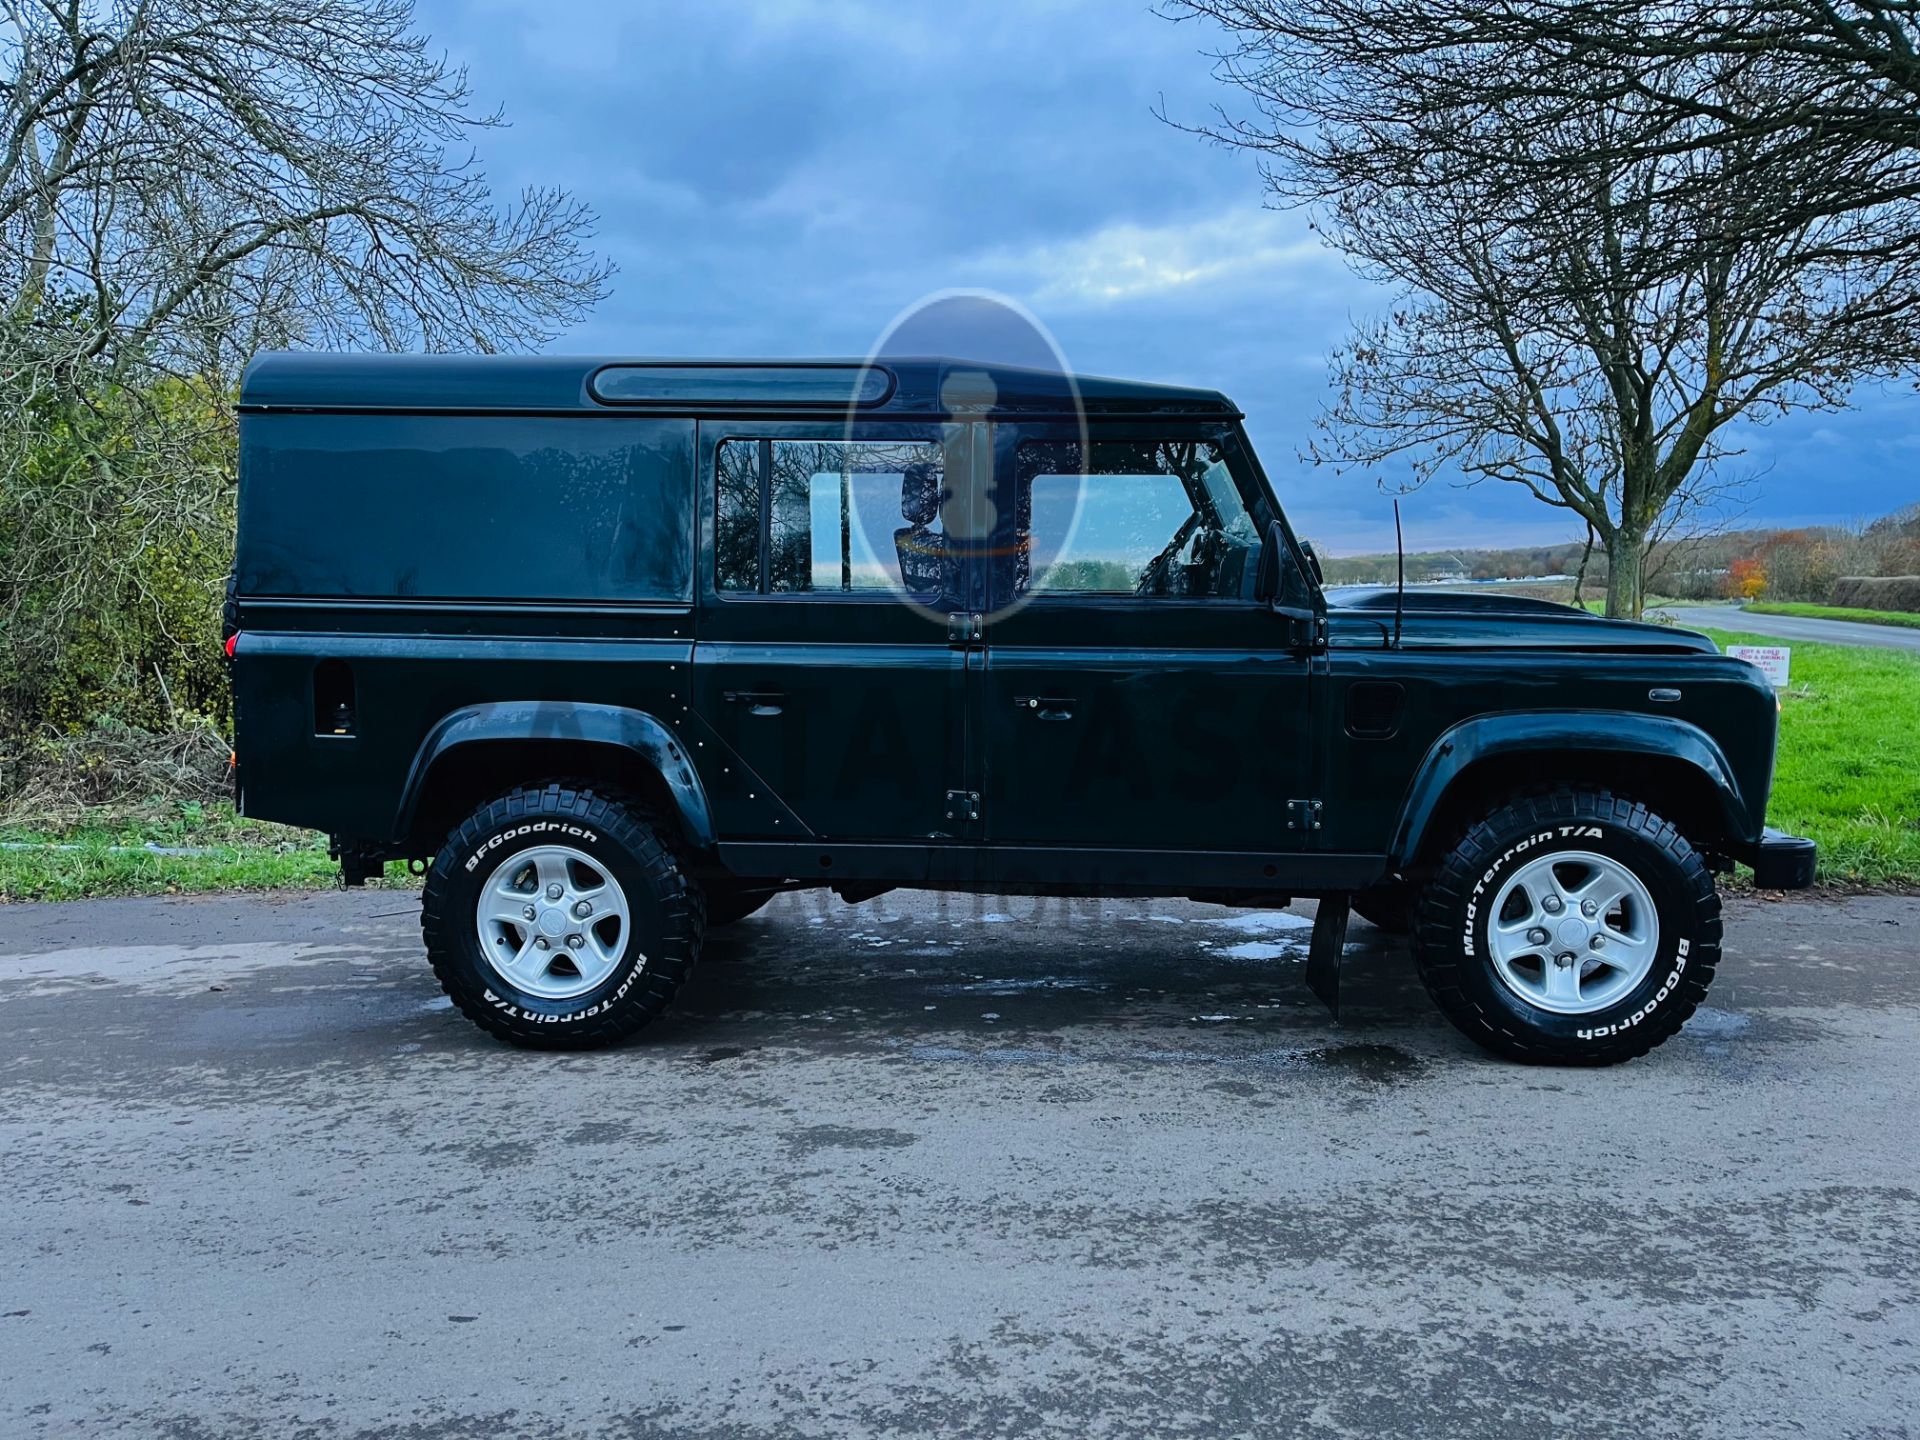 (ON SALE) LAND ROVER DEFENDER 110 *COUNTY-UTILITY WAGON* 2.2 TDCI (2016 MODEL) ONLY 37K MILES!! - Image 12 of 24